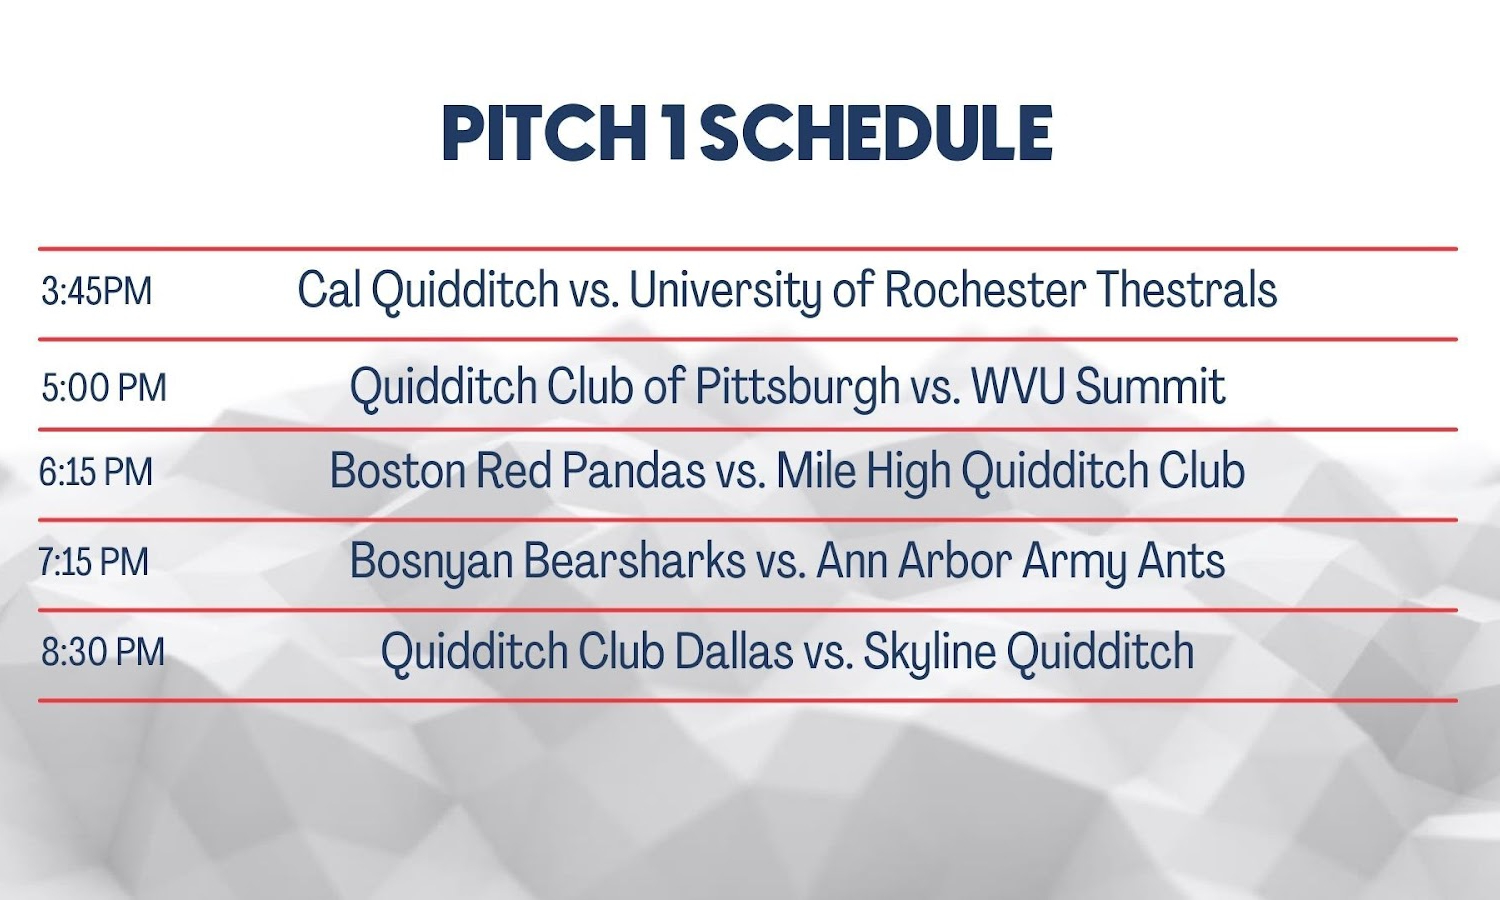 Pitch 1 will be streamed on www.twitch.tv/usquidditch.